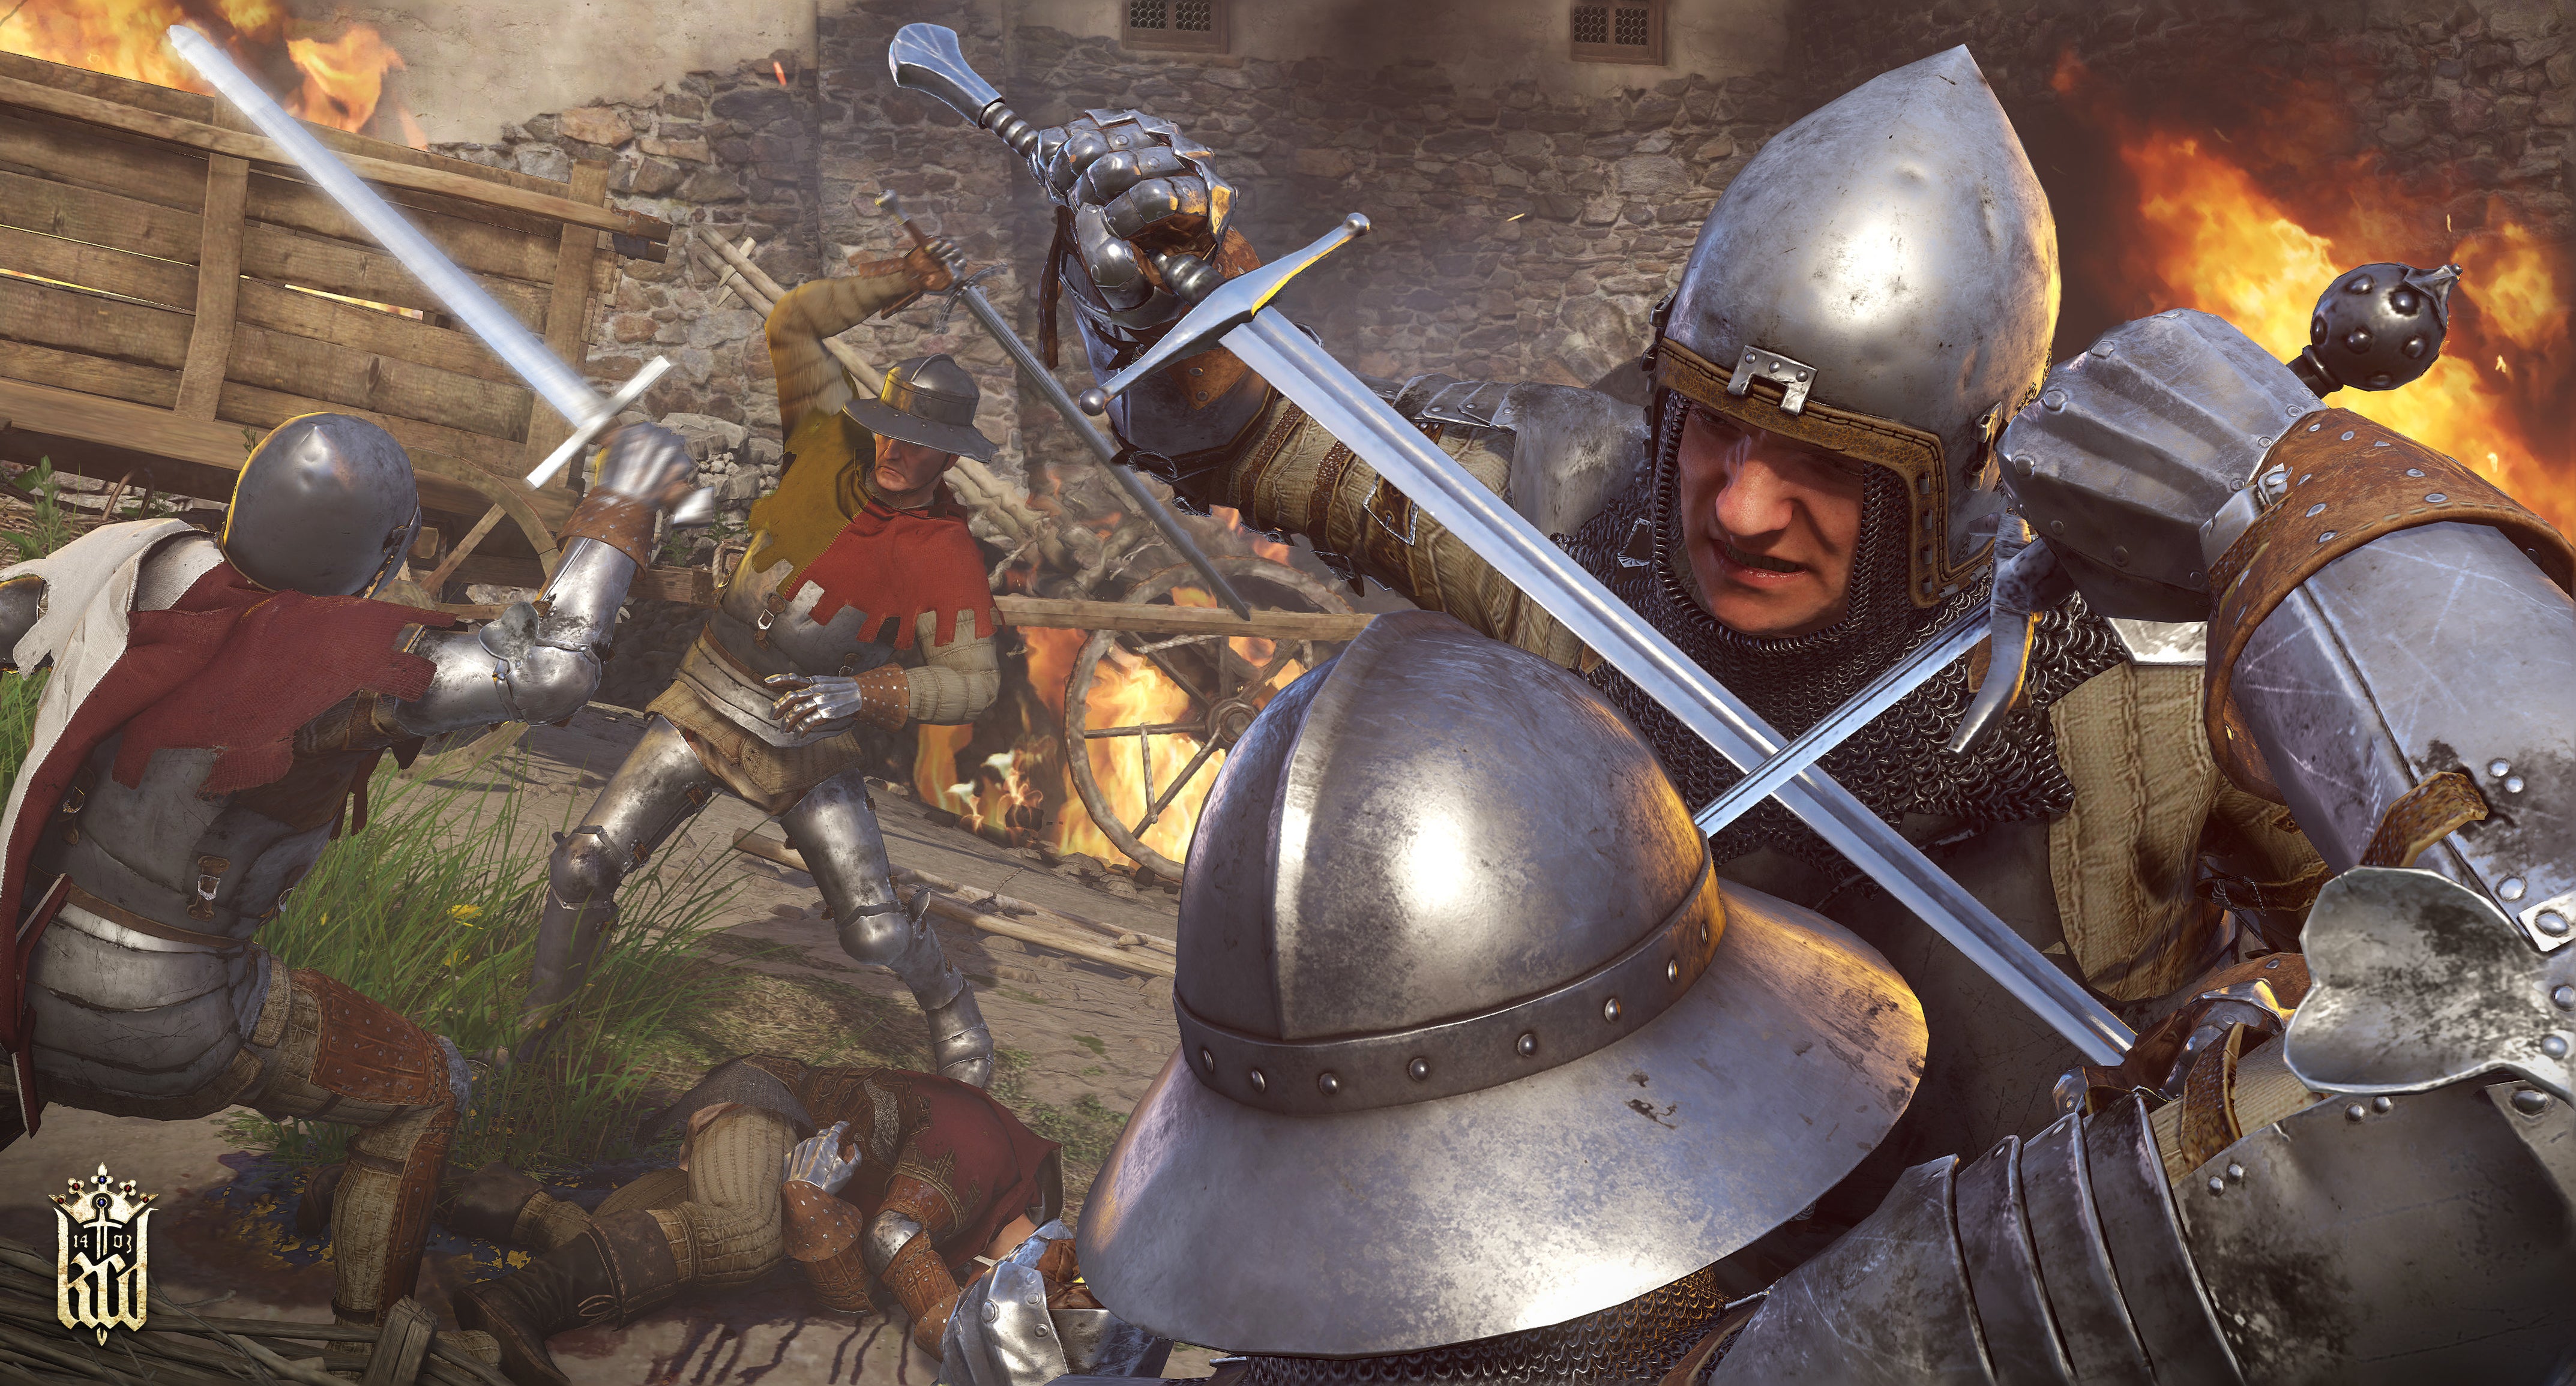 Image for Kingdom Come: Deliverance Royal Edition includes all DLC, launches in May